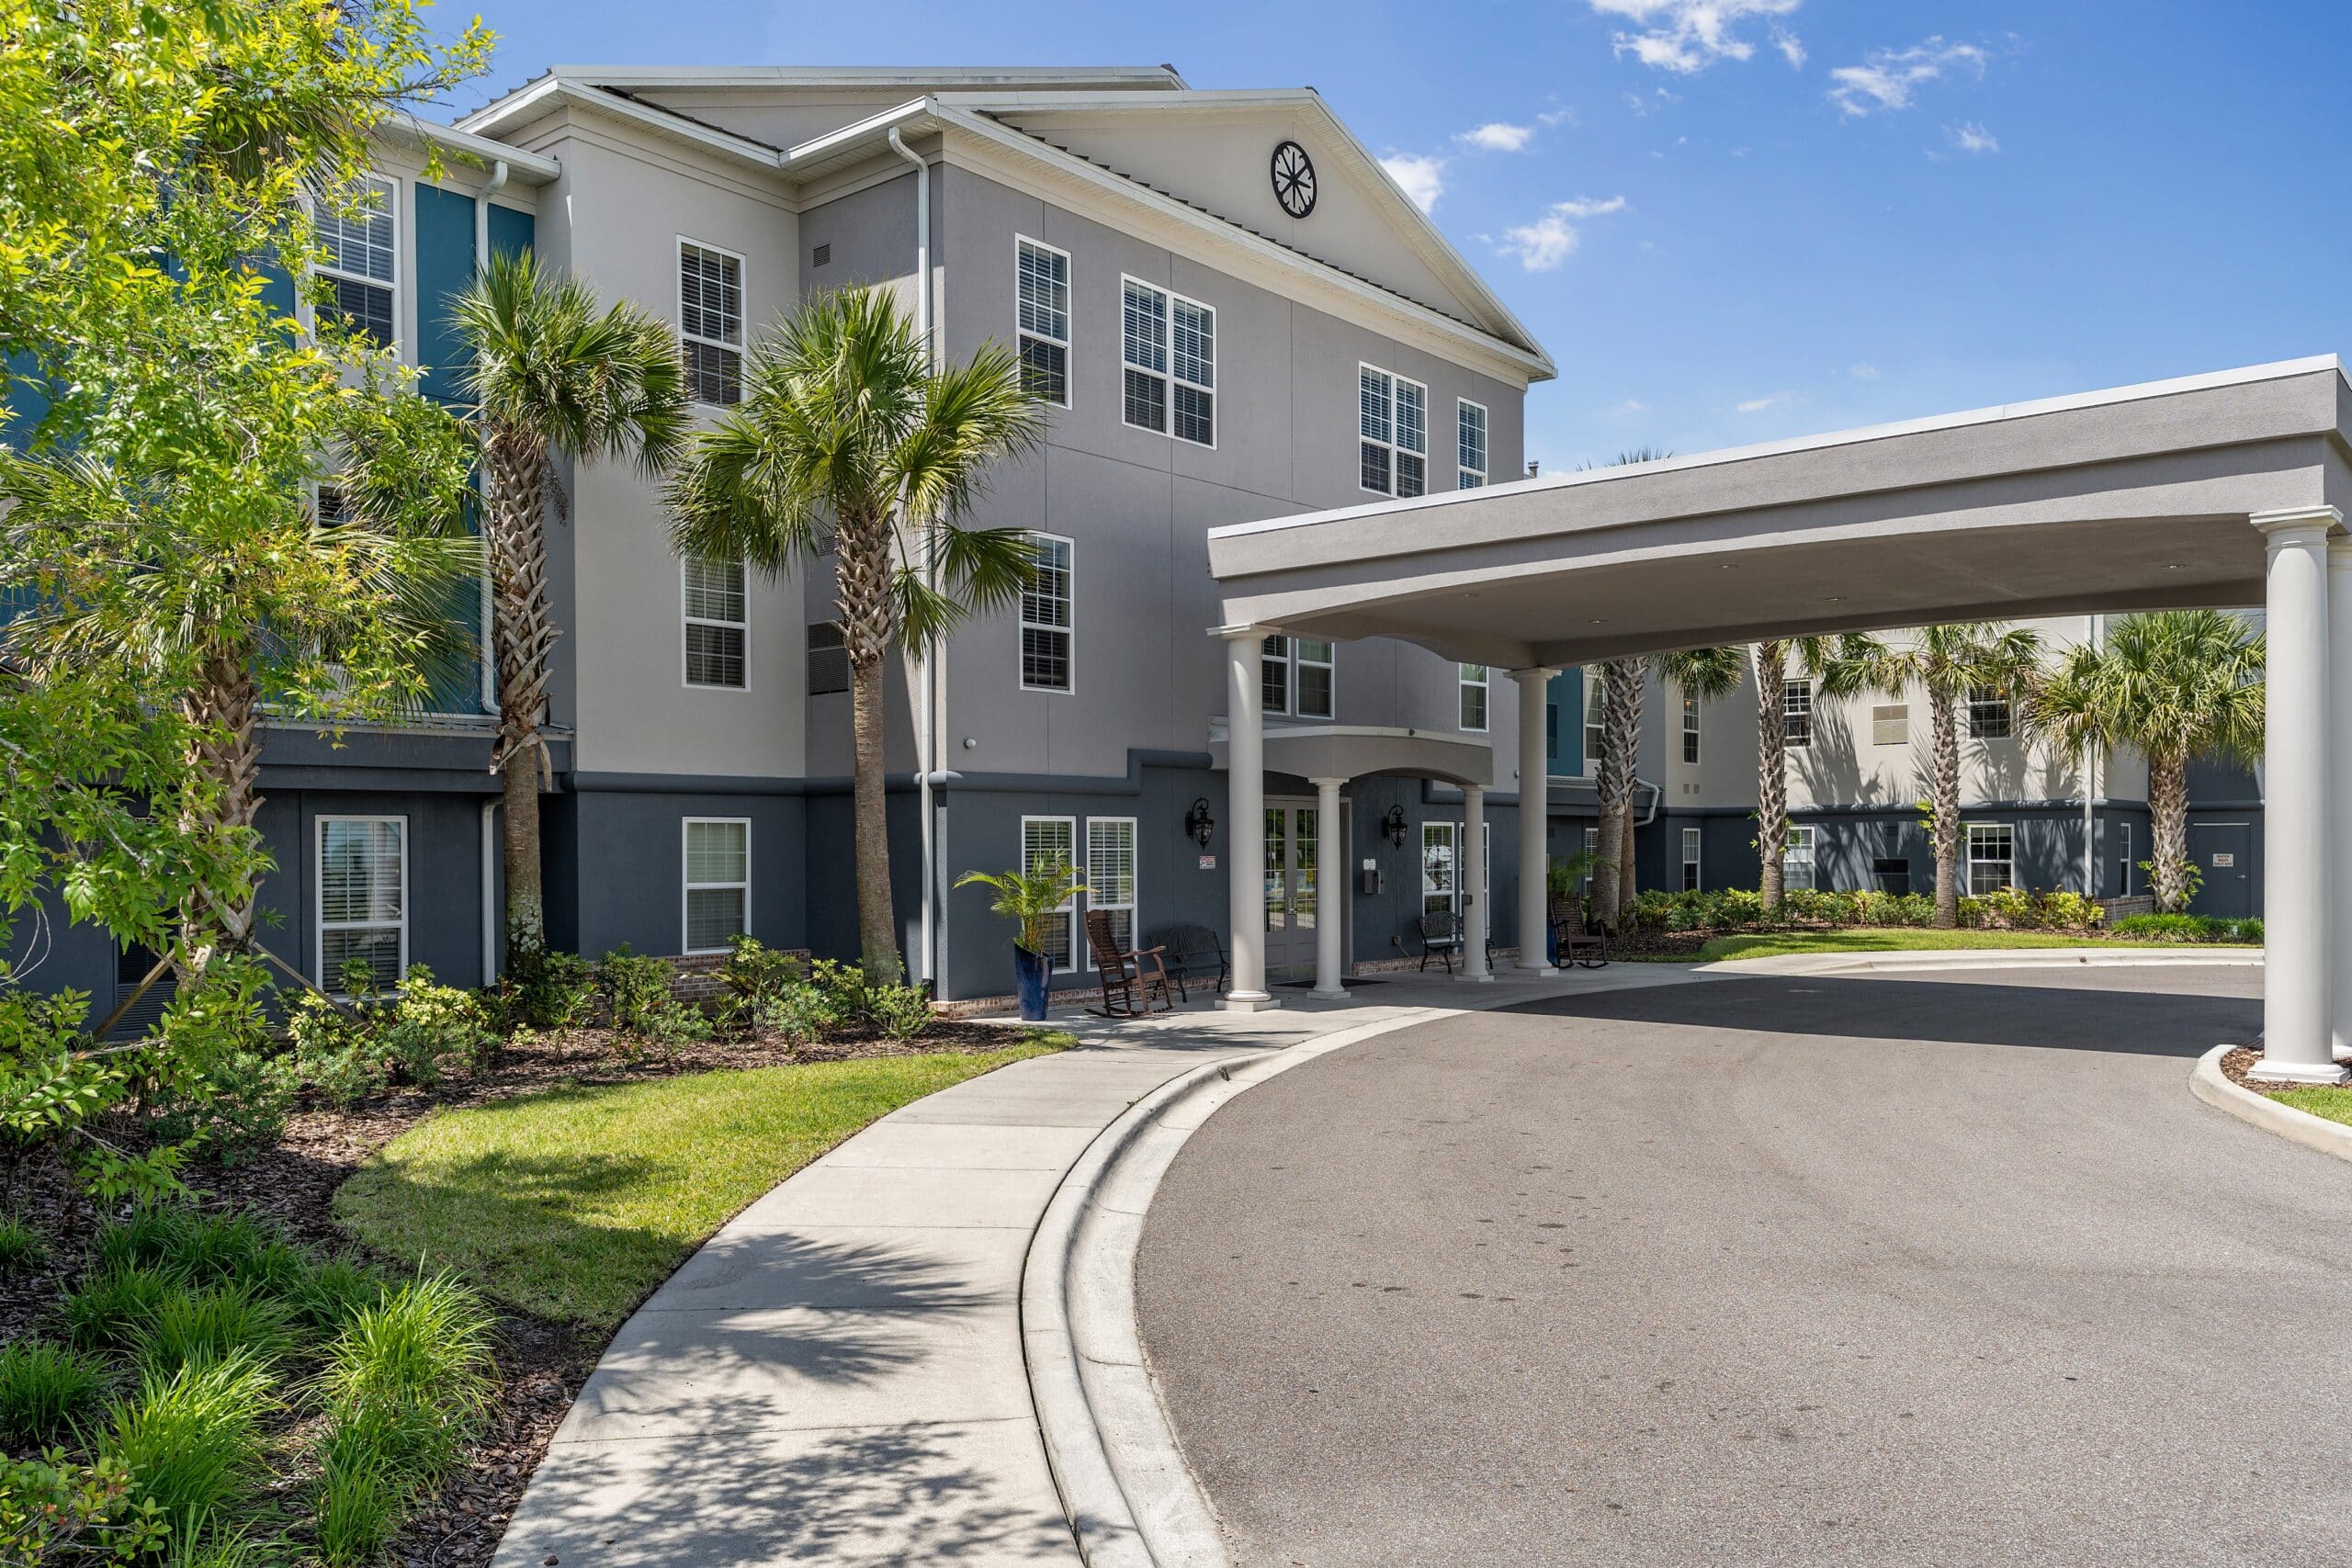 10 Best Assisted Living Facilities in Orlando FL